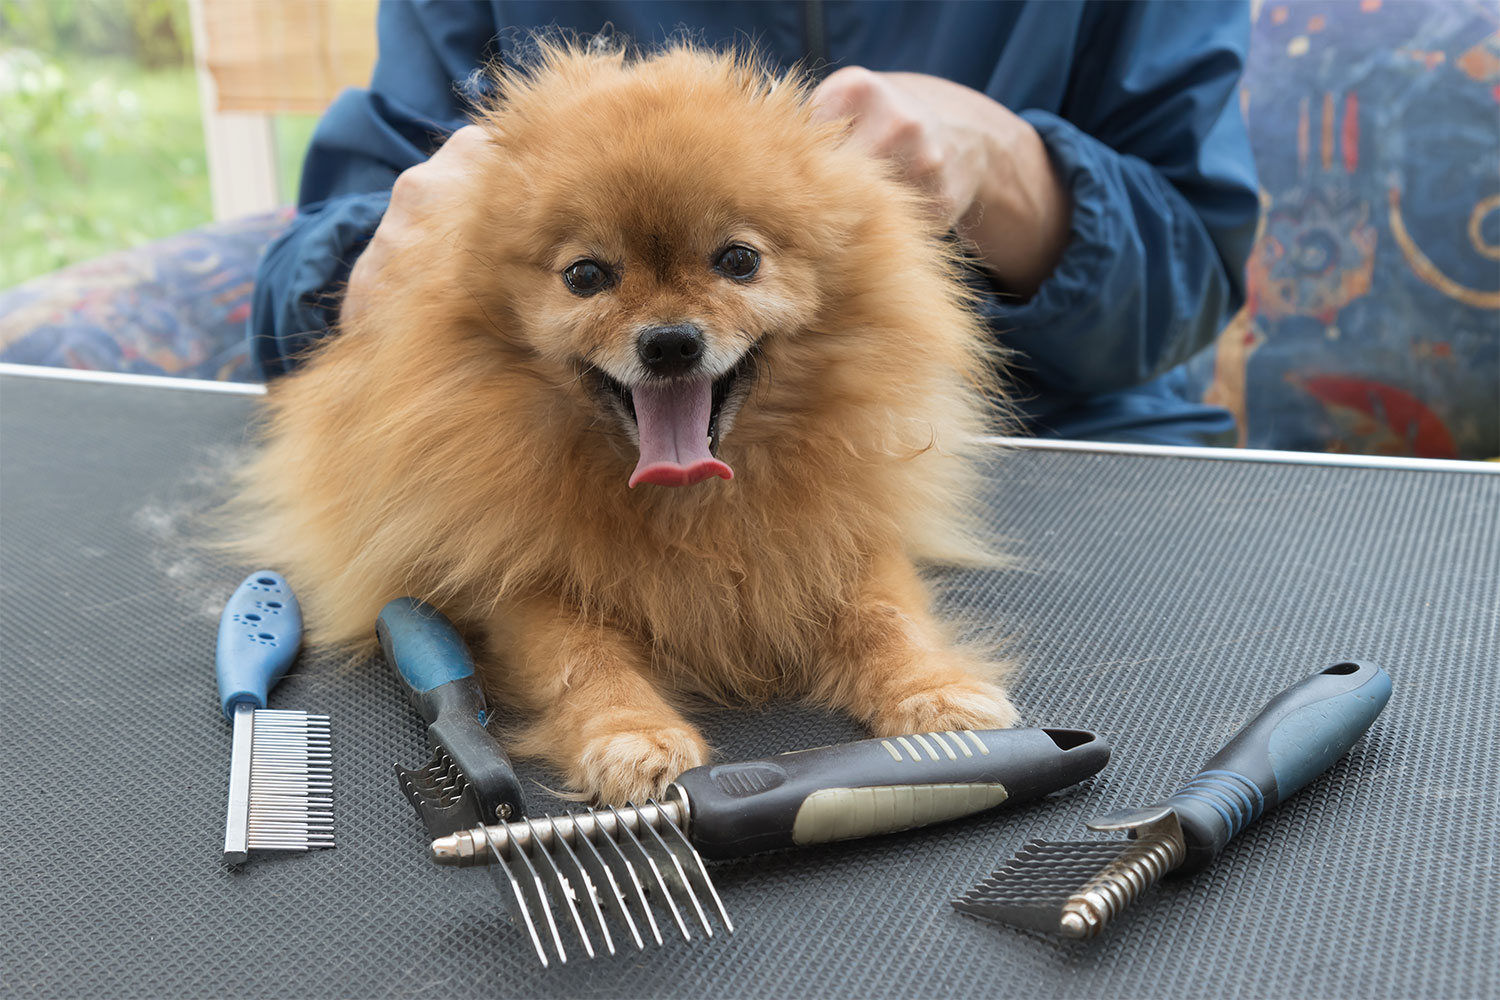 Which Type Of Grooming Does Your Puppy Need